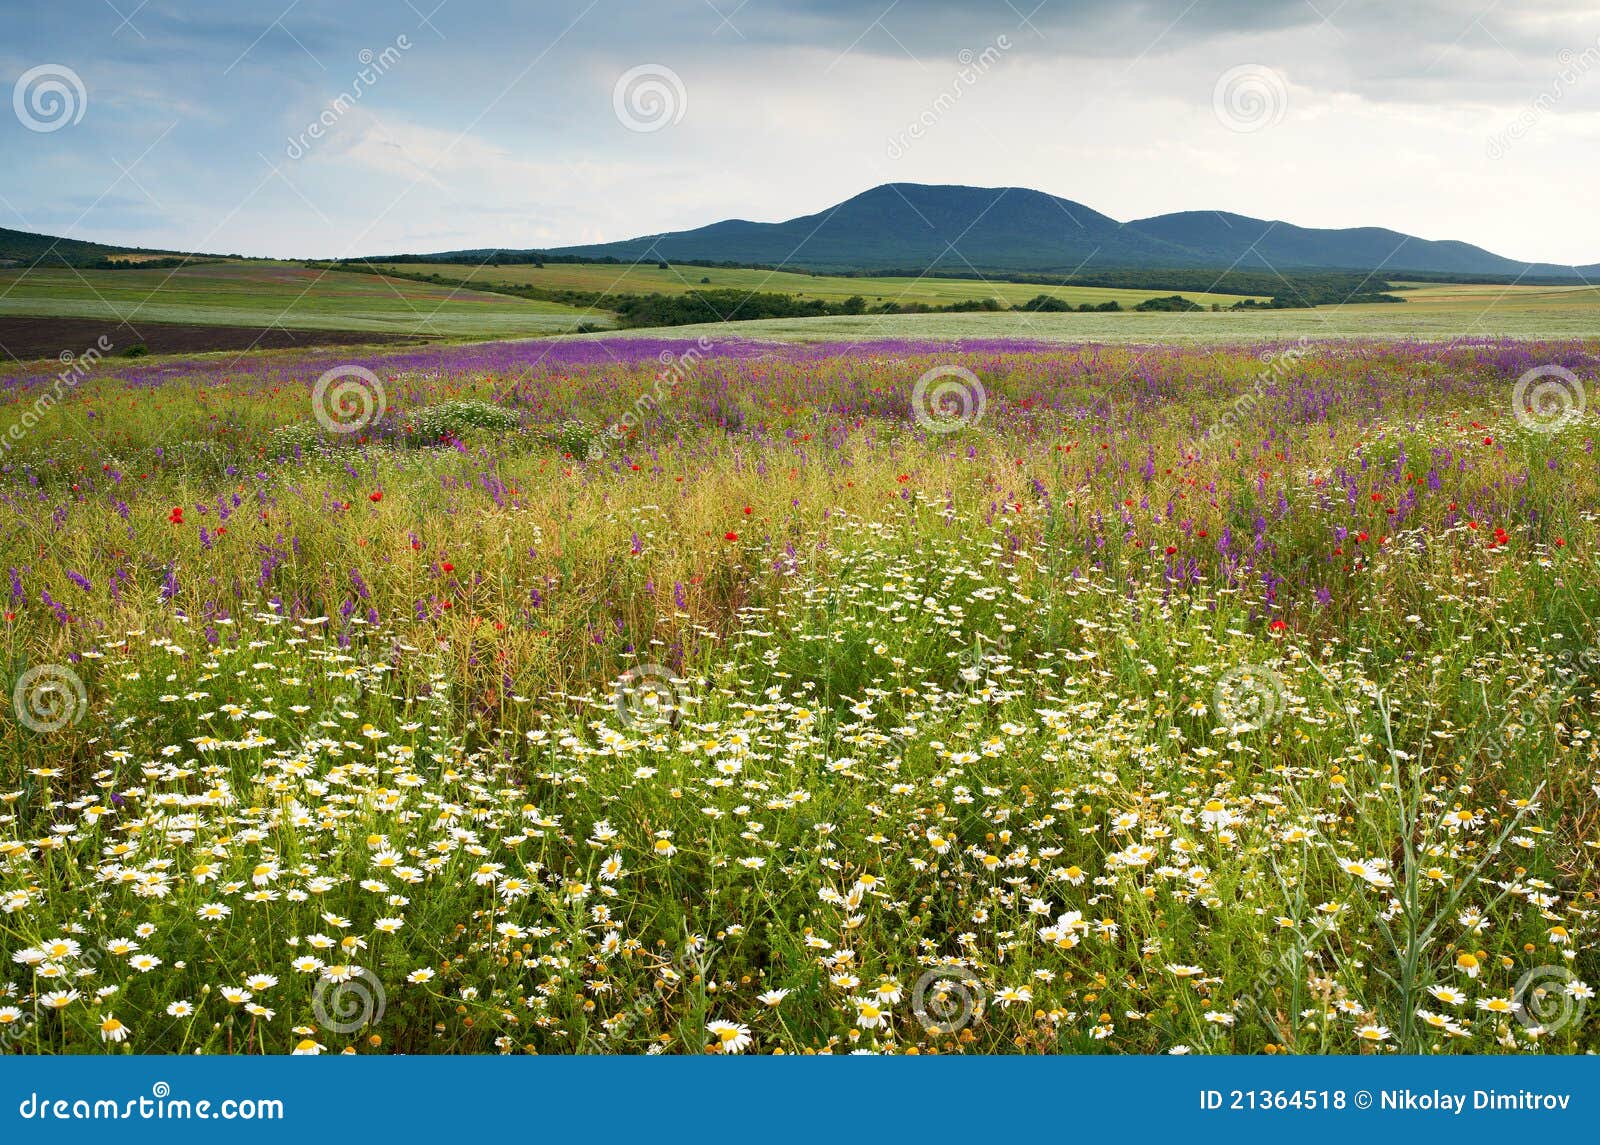 Spring Scenery With Wild Flowers Royalty Free Stock Photos - Image